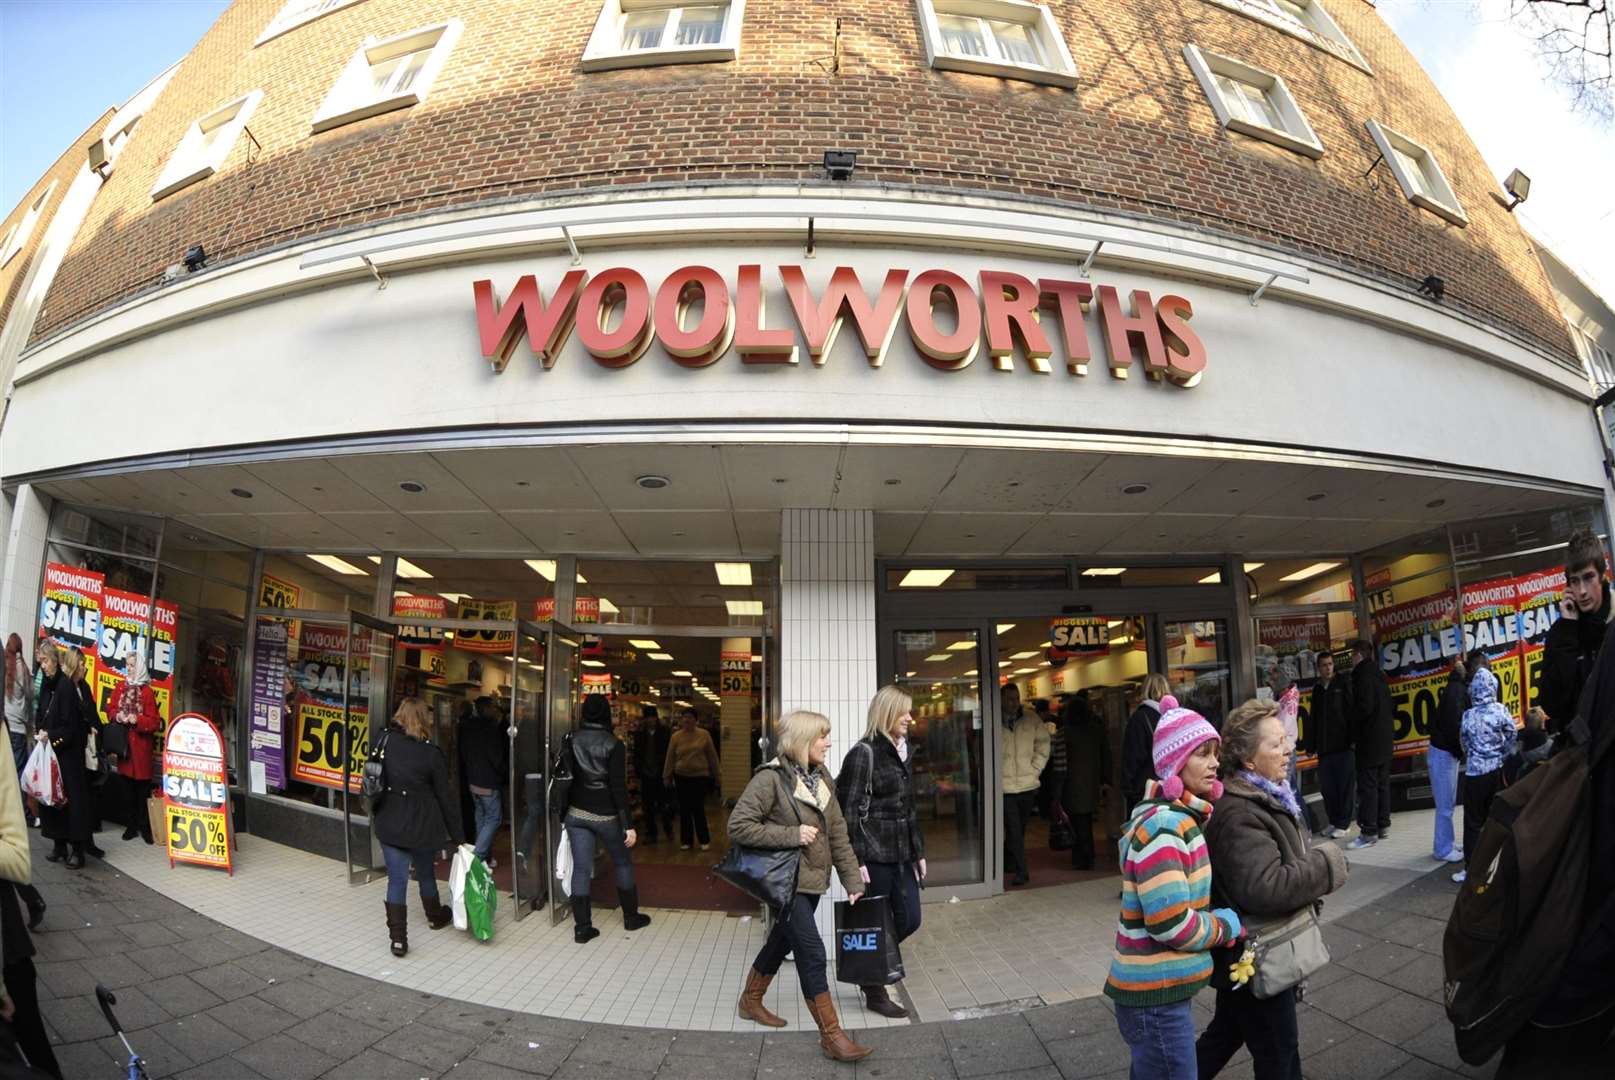 Woolworths pictured in 2008